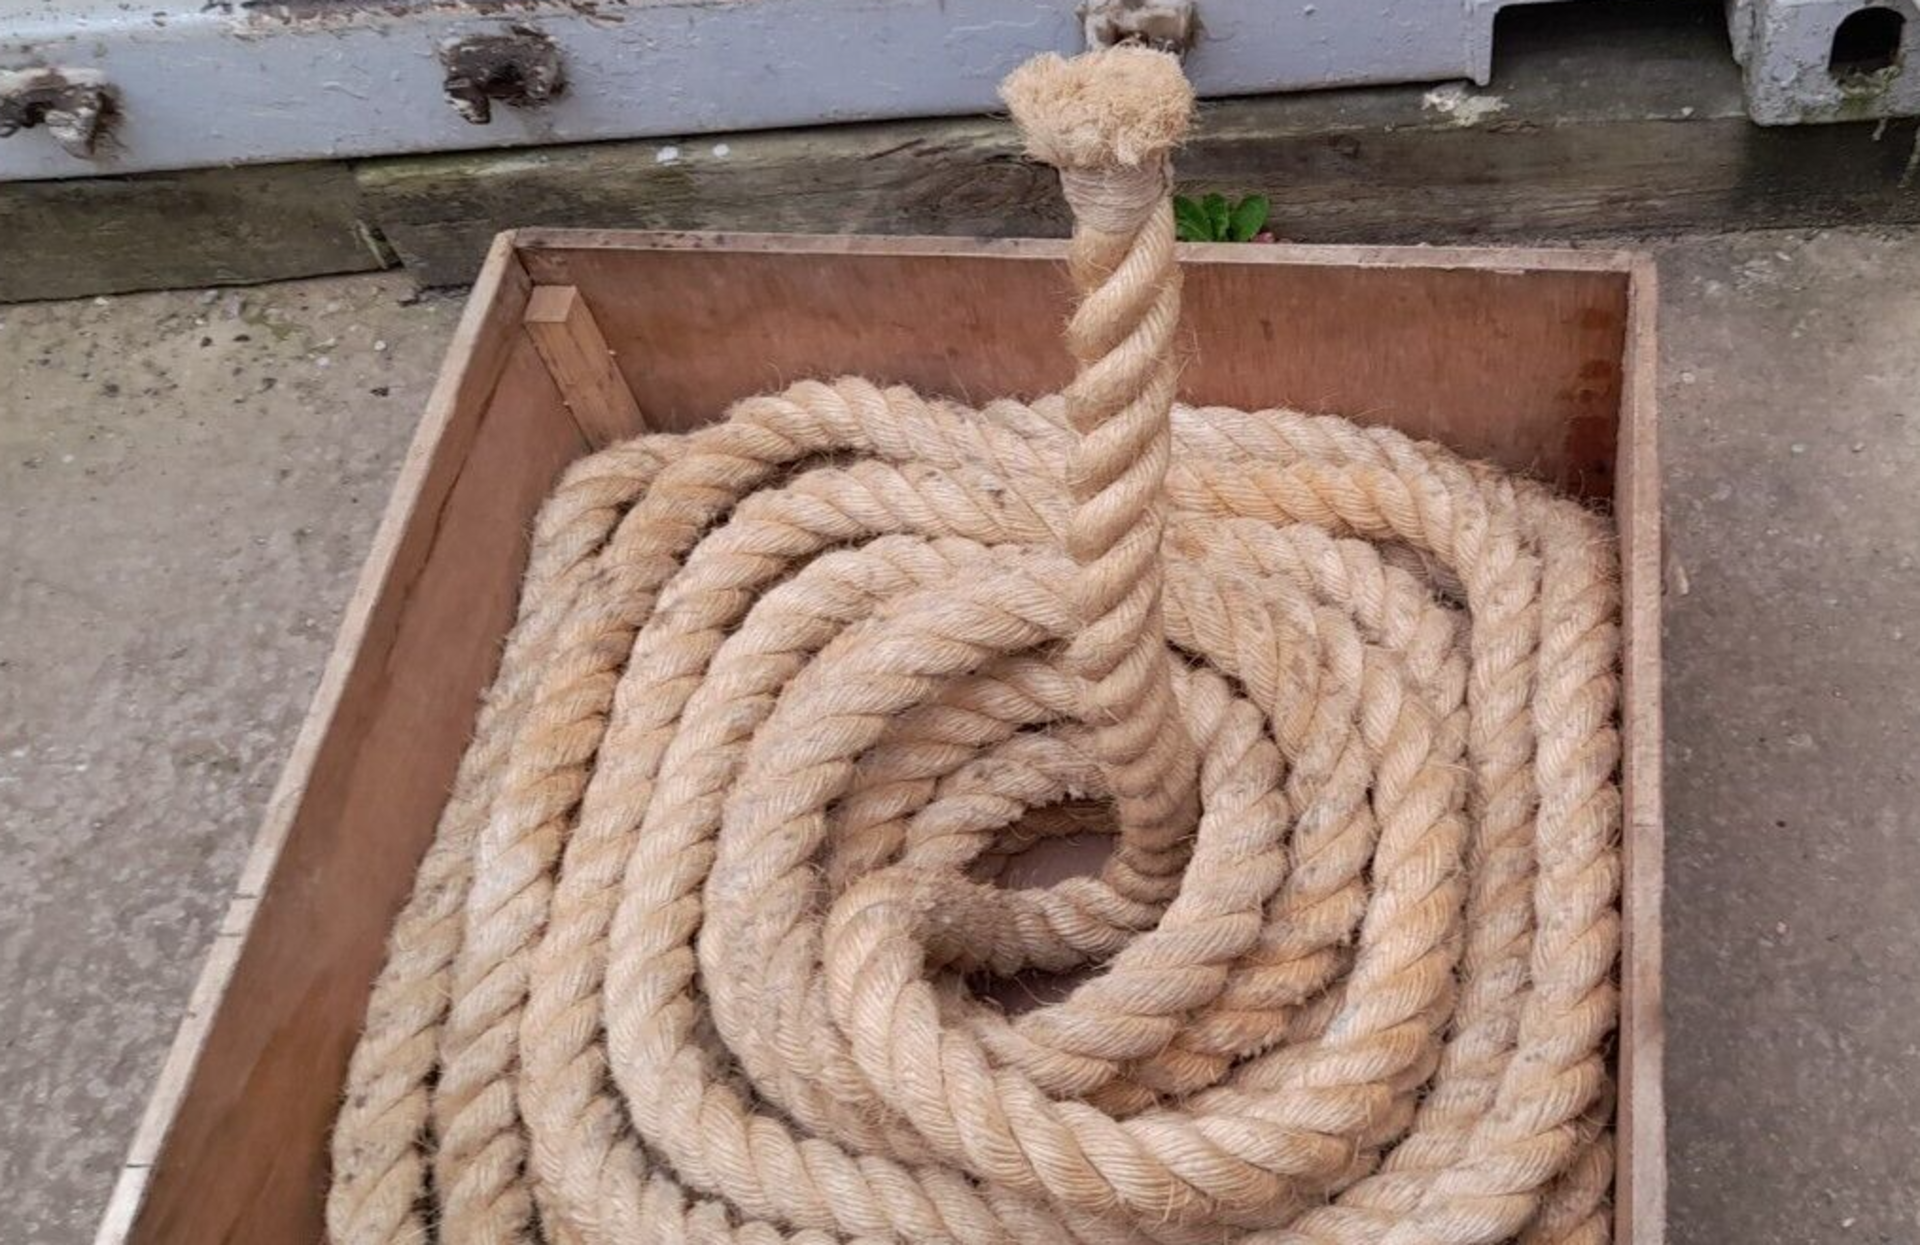 sport TUG O WAR ROPE, USED ONCE, DRY STORED, ABOUT 29 METERS L X 13cm circumference sport gym - Image 3 of 5